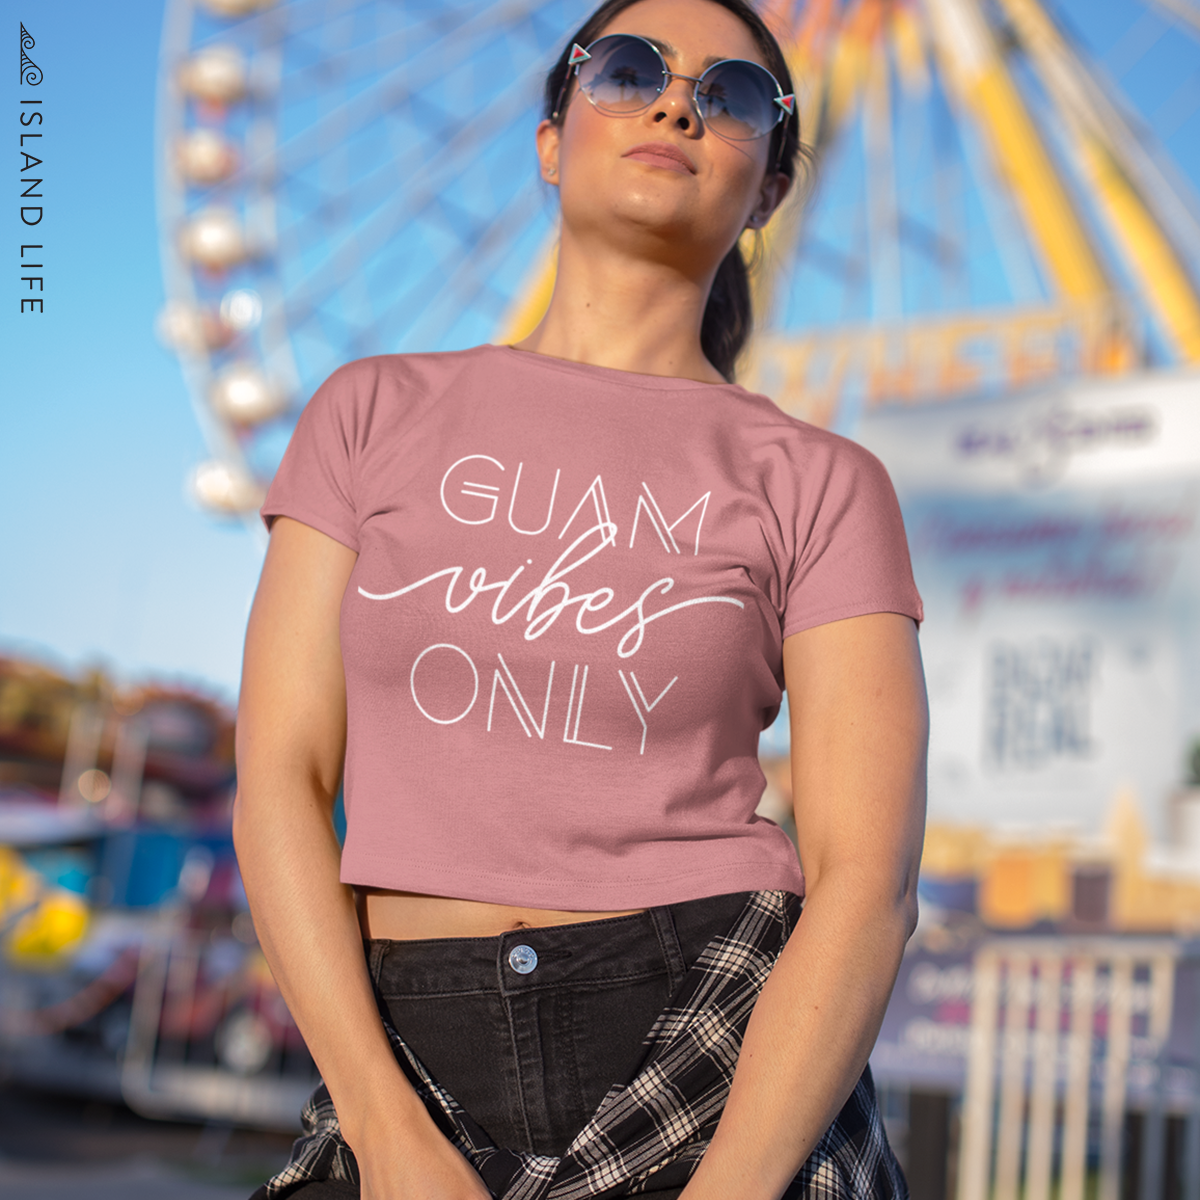 Guam Vibes Only Women's Cropped T-Shirt